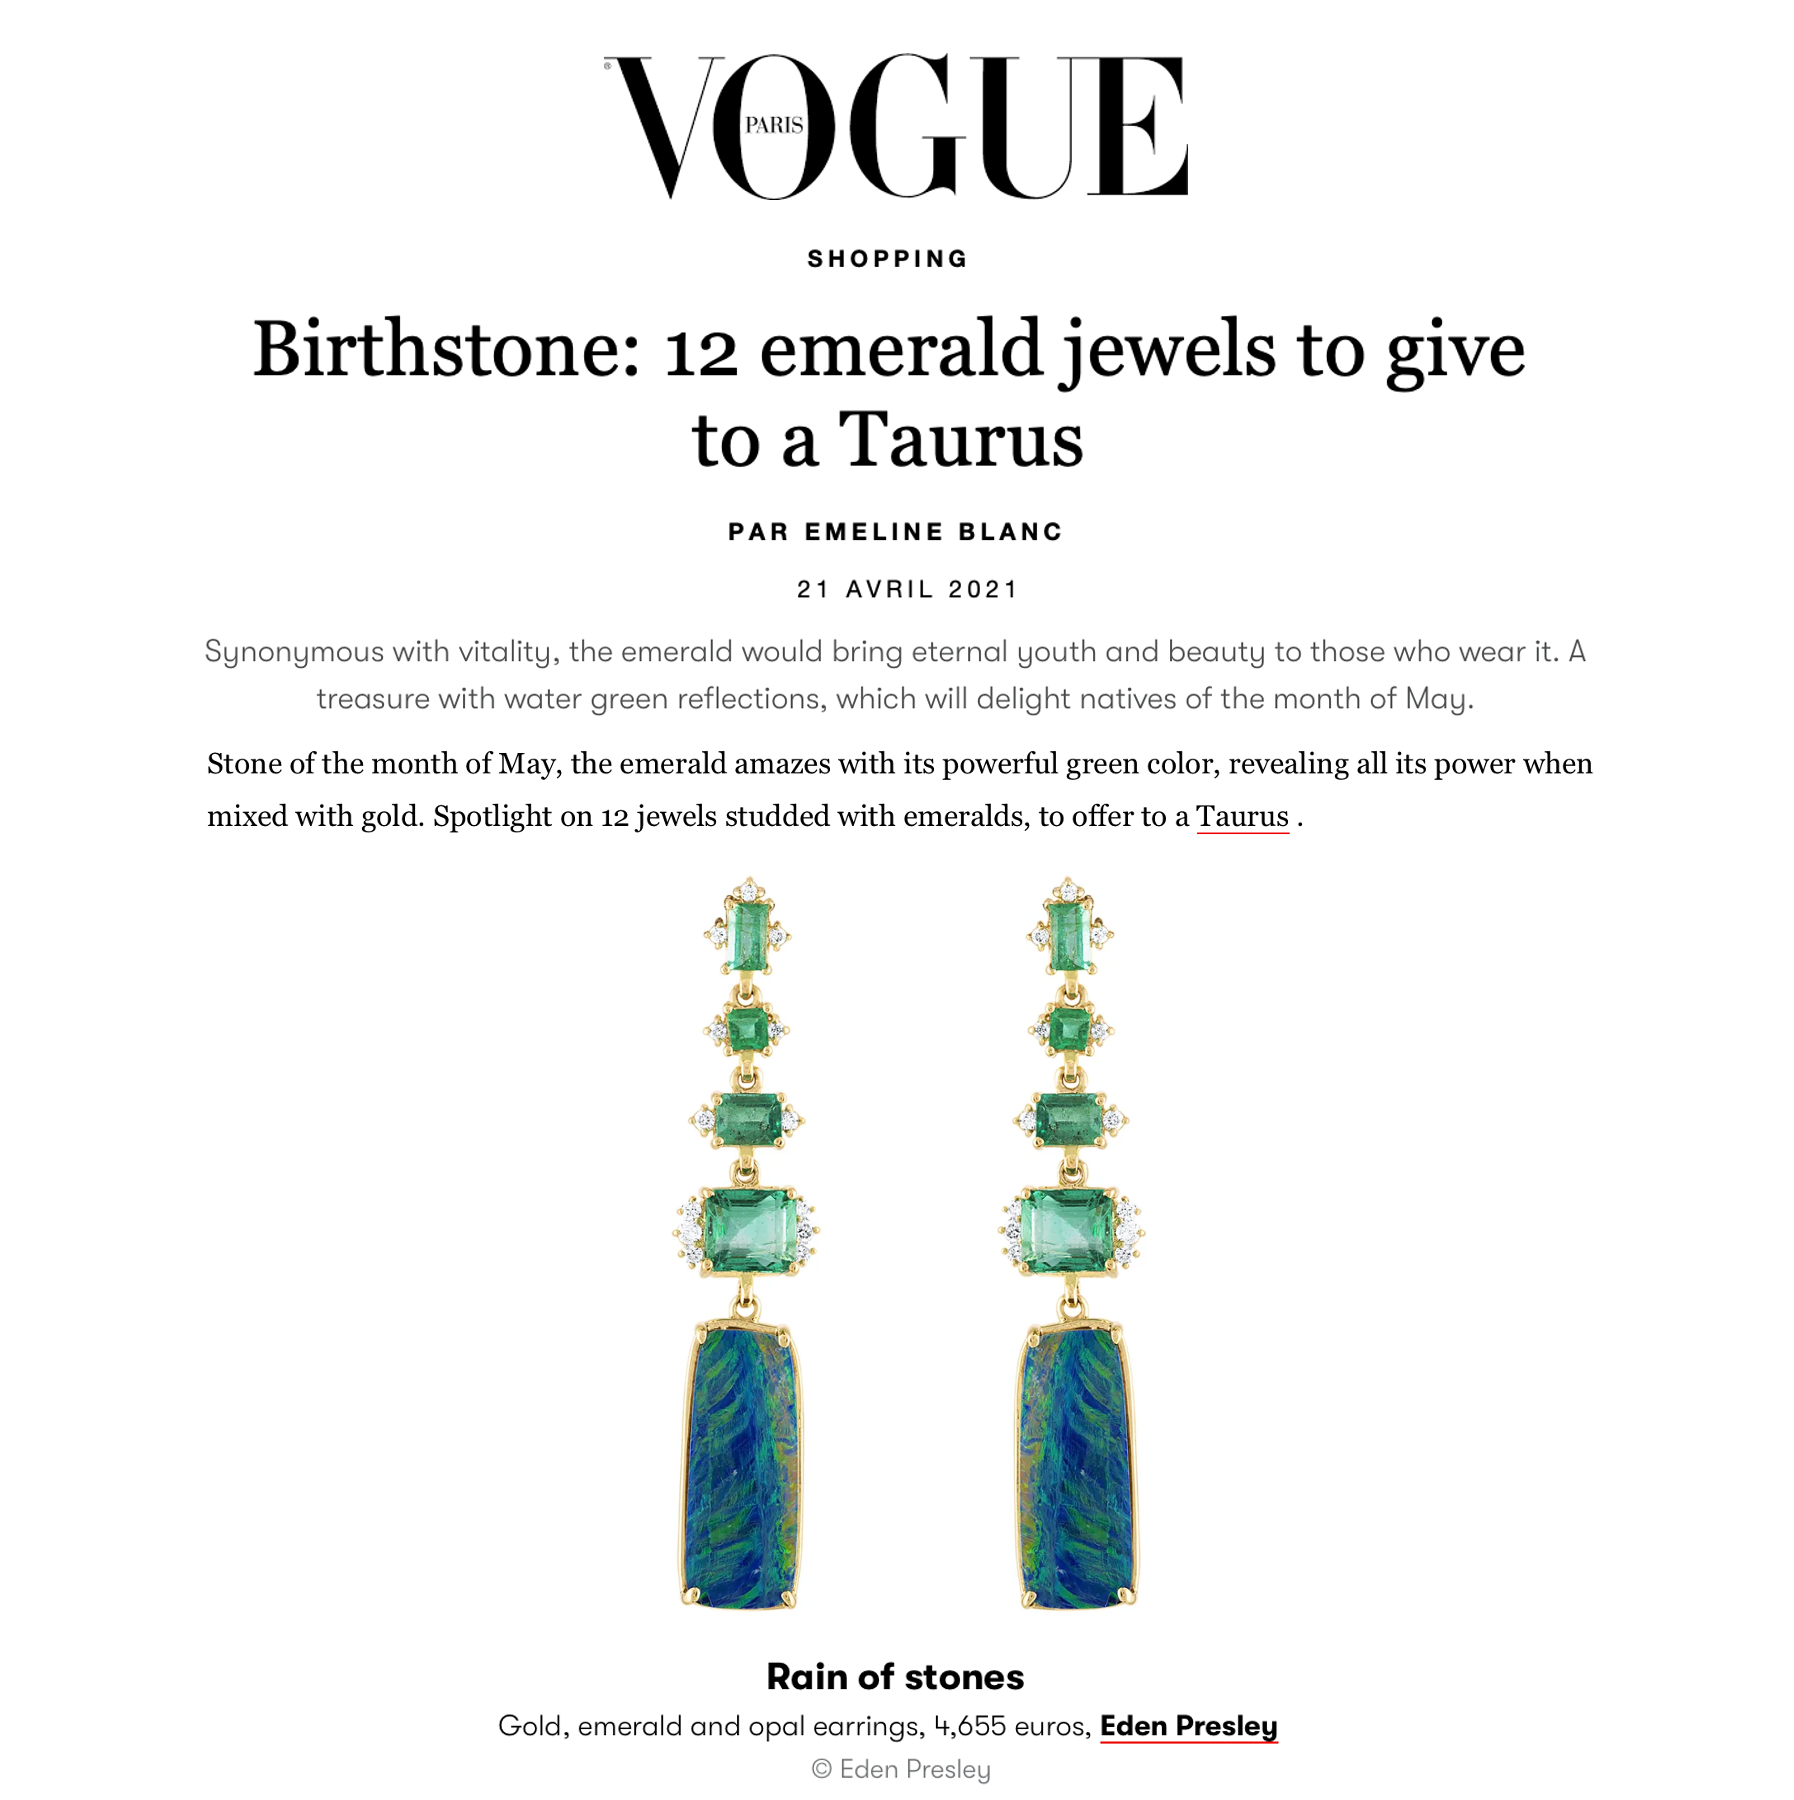 Vogue Paris: Birthstone: 12 Emerald Jewels to Give to a Taurus